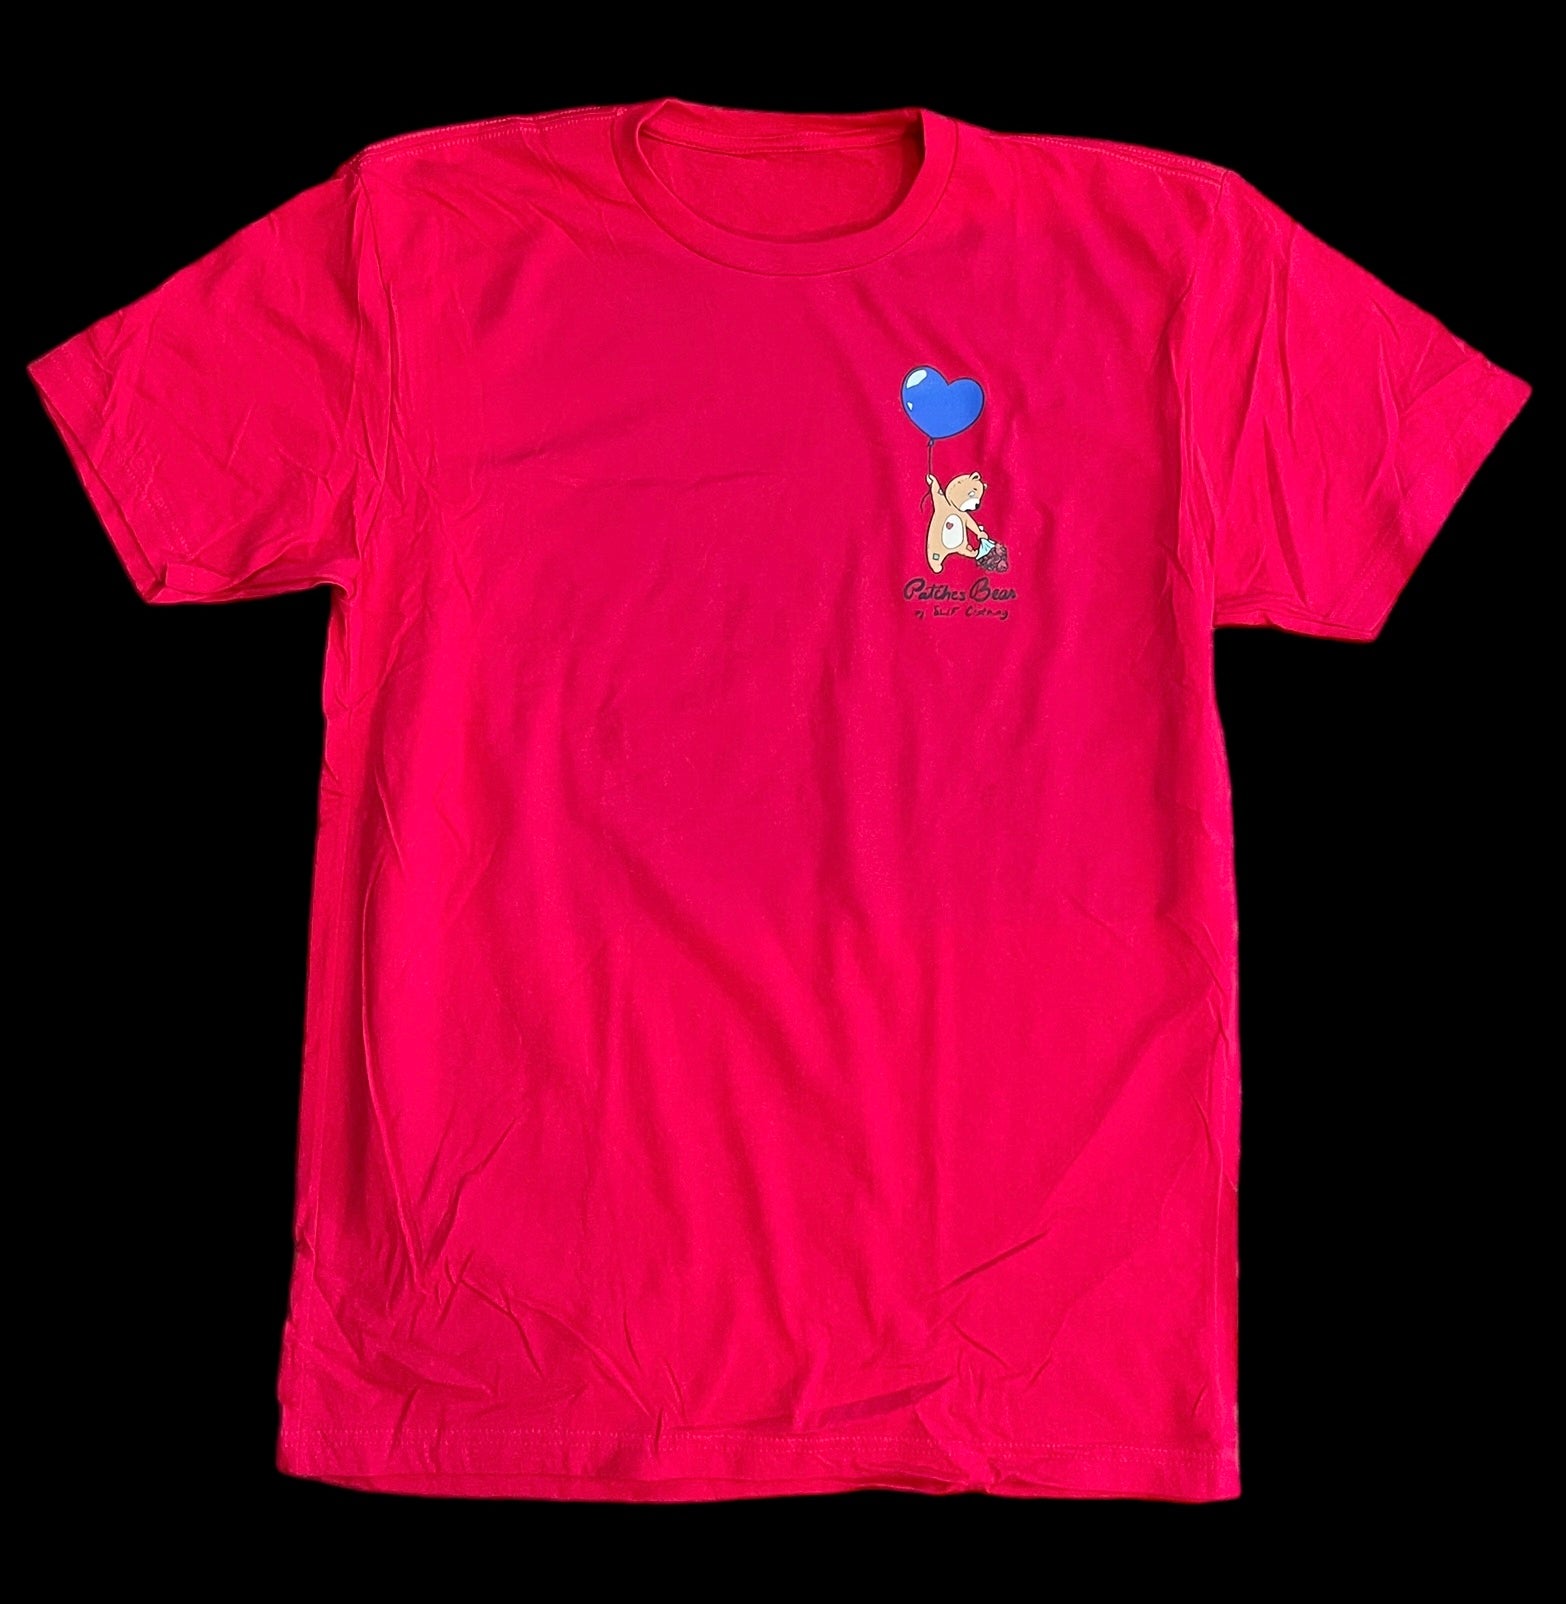 SLIF x PATCHES pocket tee (red)